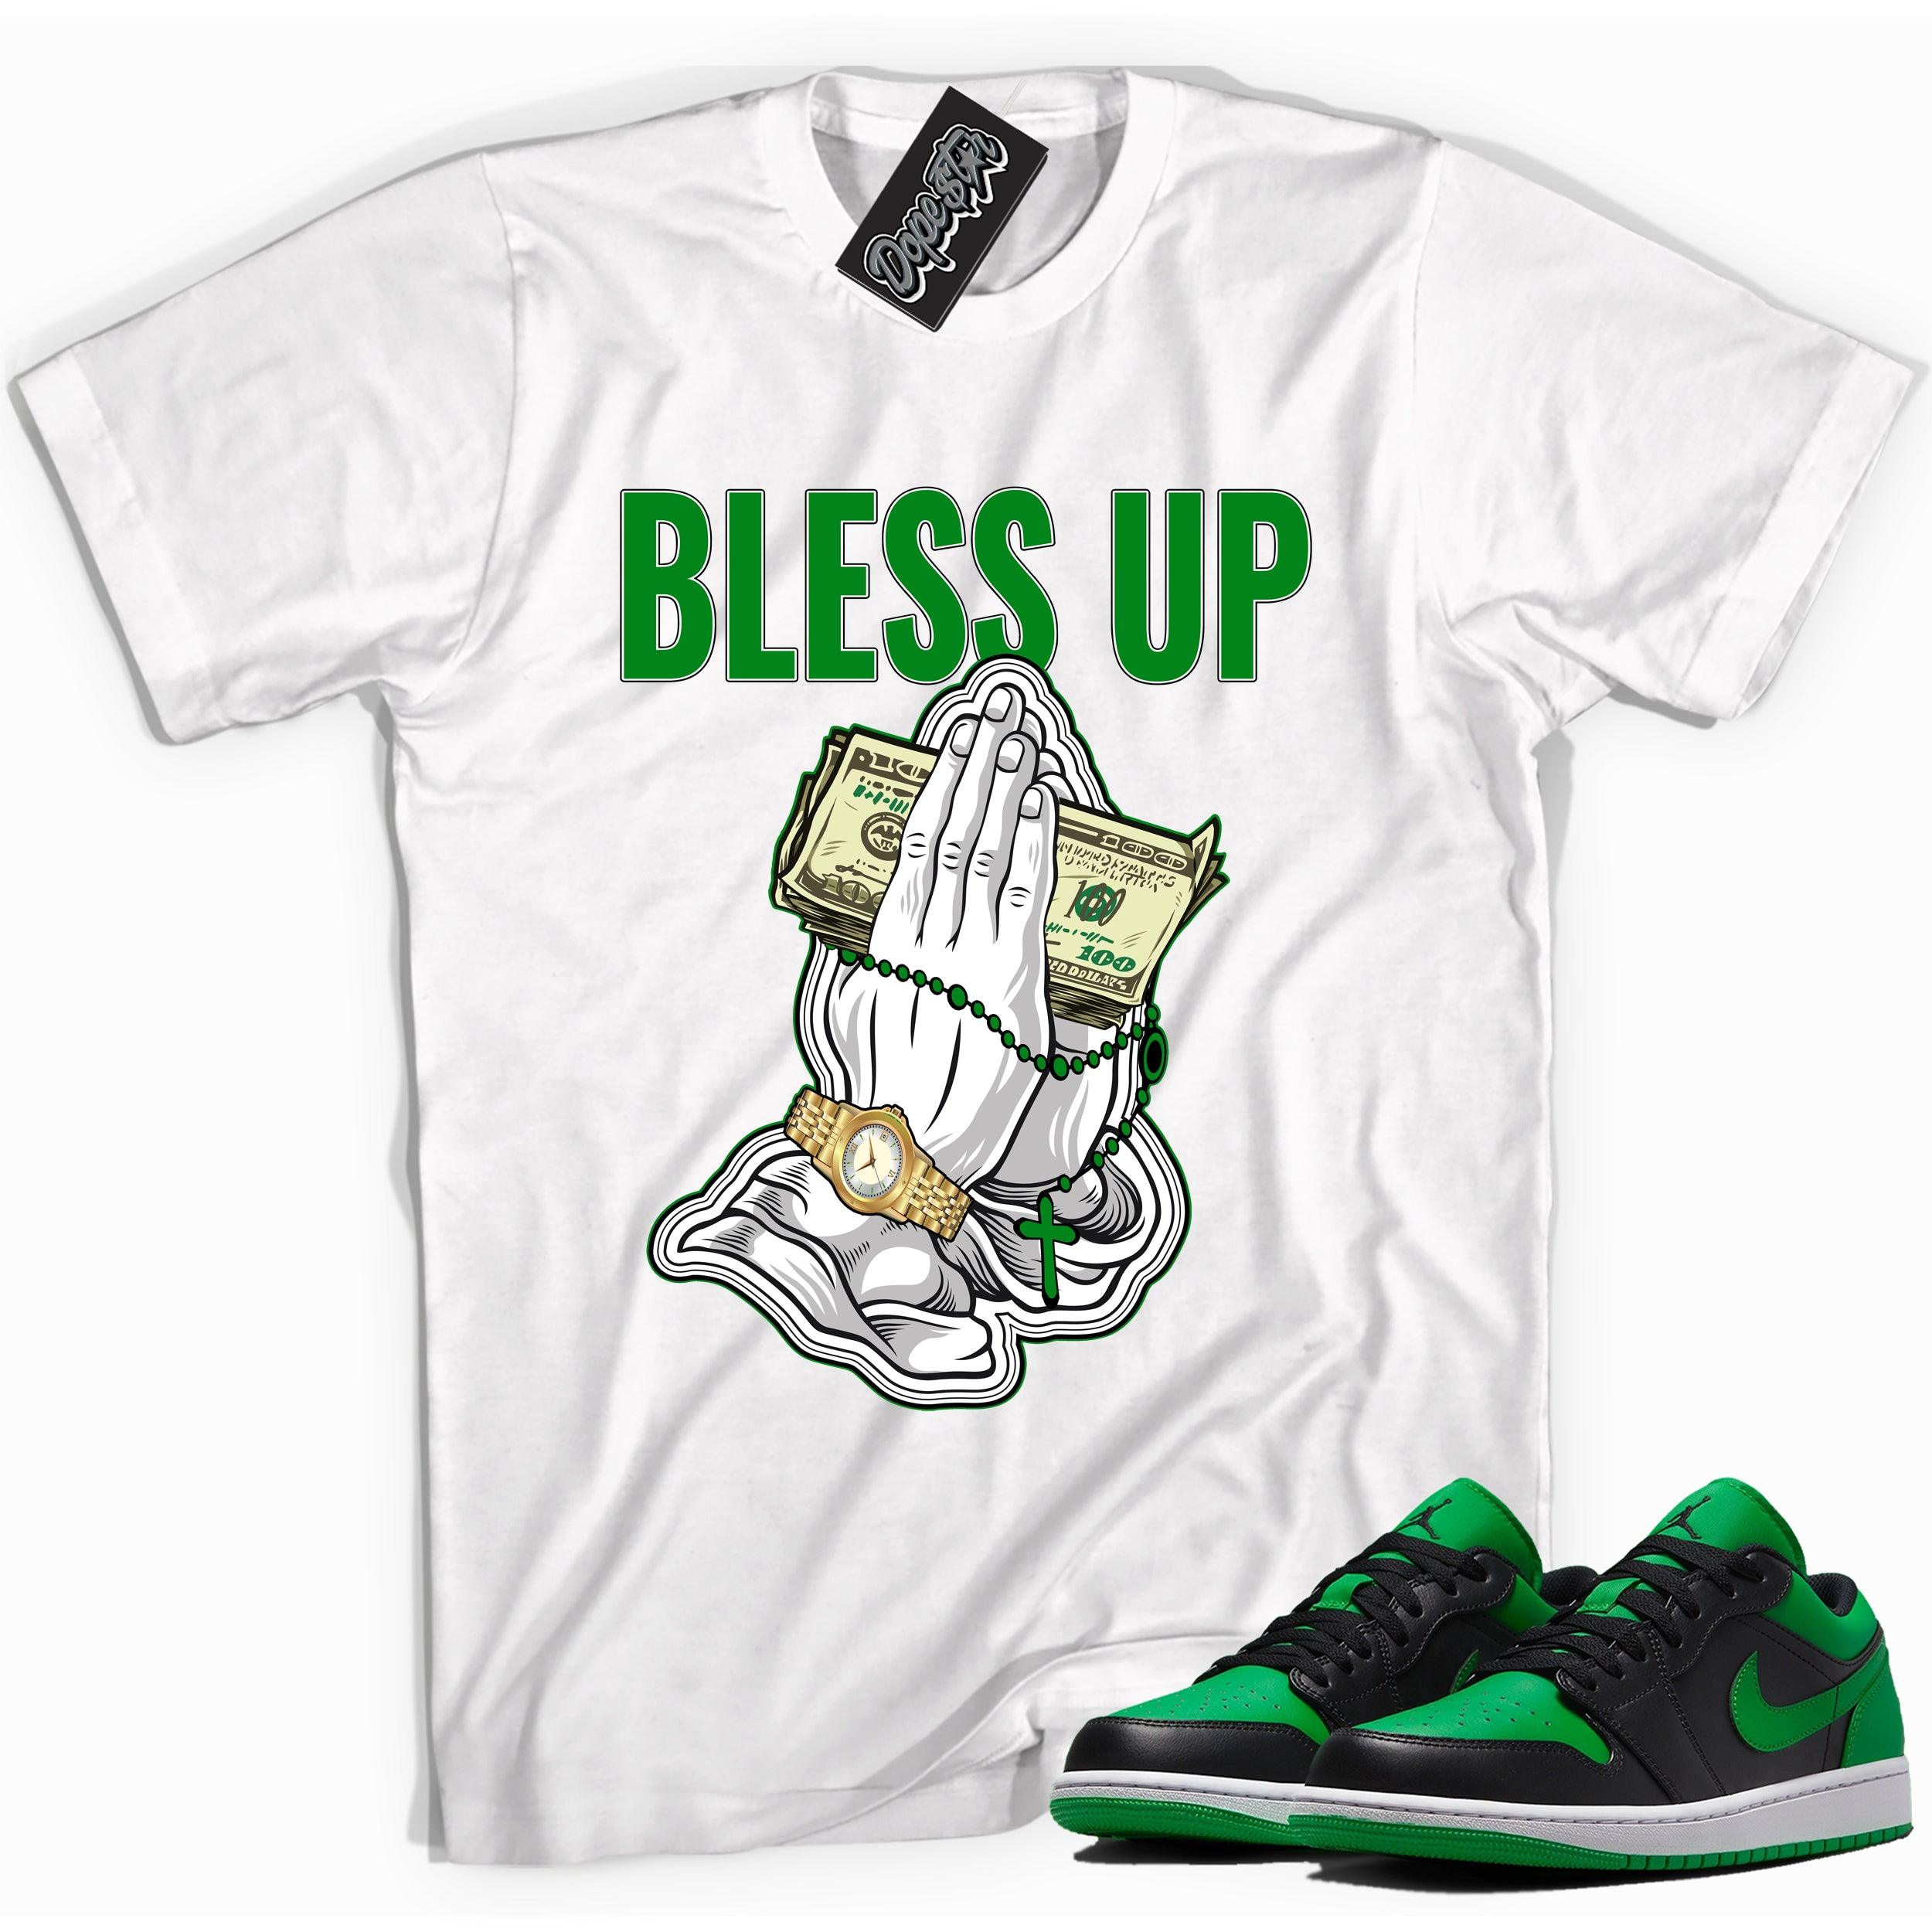 Cool white graphic tee with 'Bless Up' print, that perfectly matches Air Jordan 1 Low Lucky Green sneakers